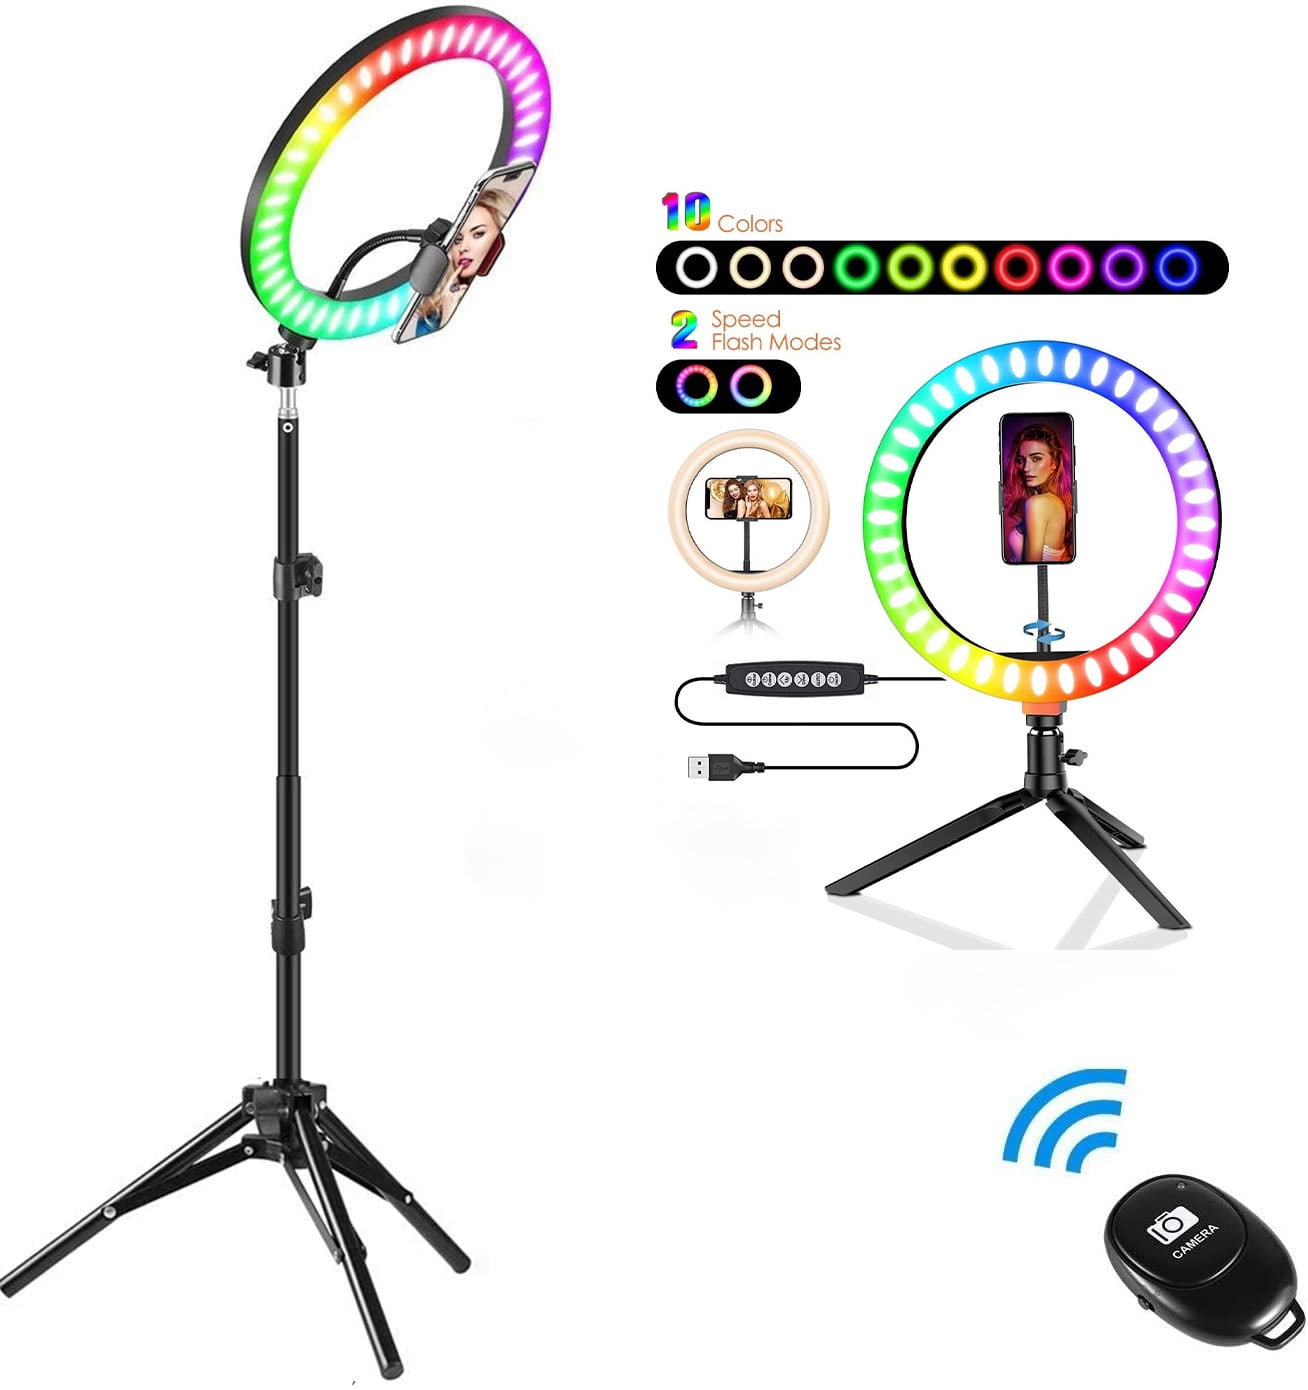 Perce 10.2 LED Selfie Ring Light with Tripod Stand & Phone Holder Upgraded Wireless Shutter 12 Brightness Level & 3 Light Modes for YouTube Live Stream Makeup vlogging Photography for iPhone Android 